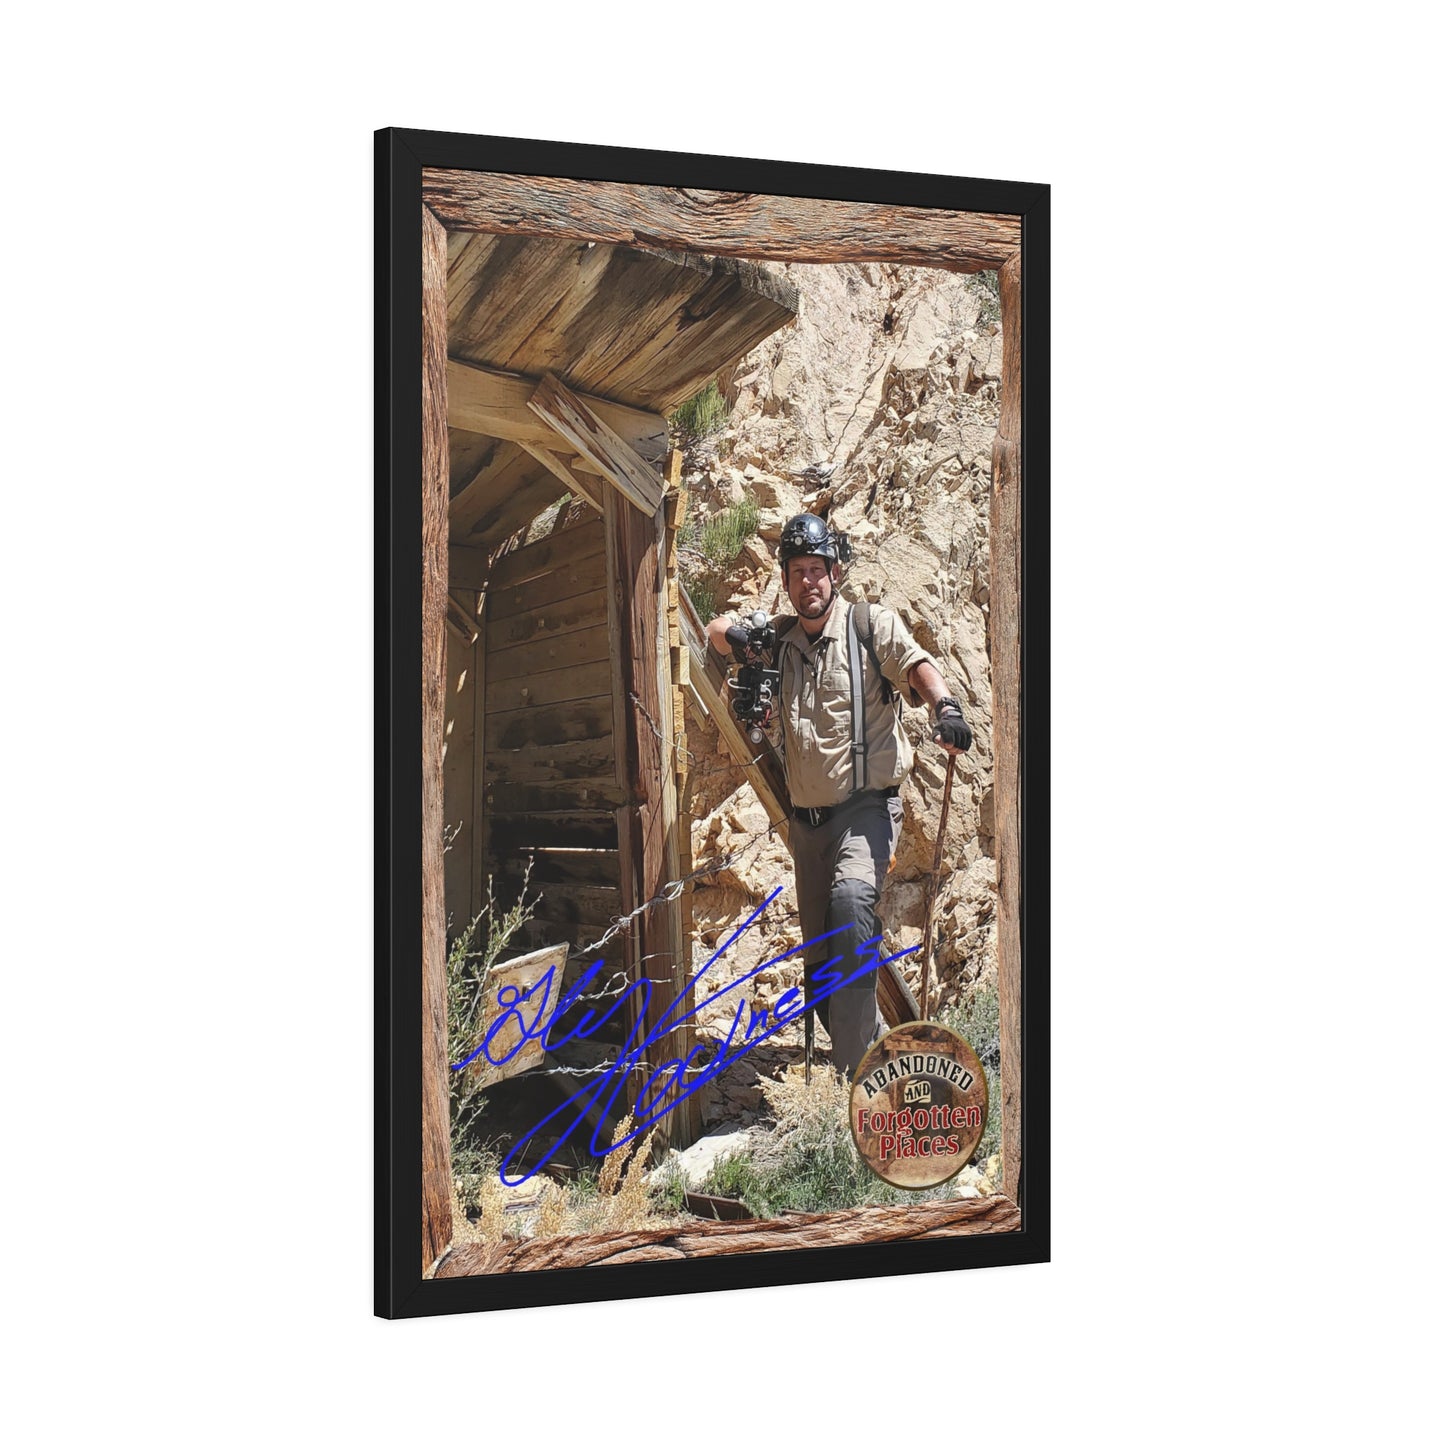 Gly Coolness Signature Collection, The Soaring Eagle Mine, Episode 54 (Pinewood Framed)